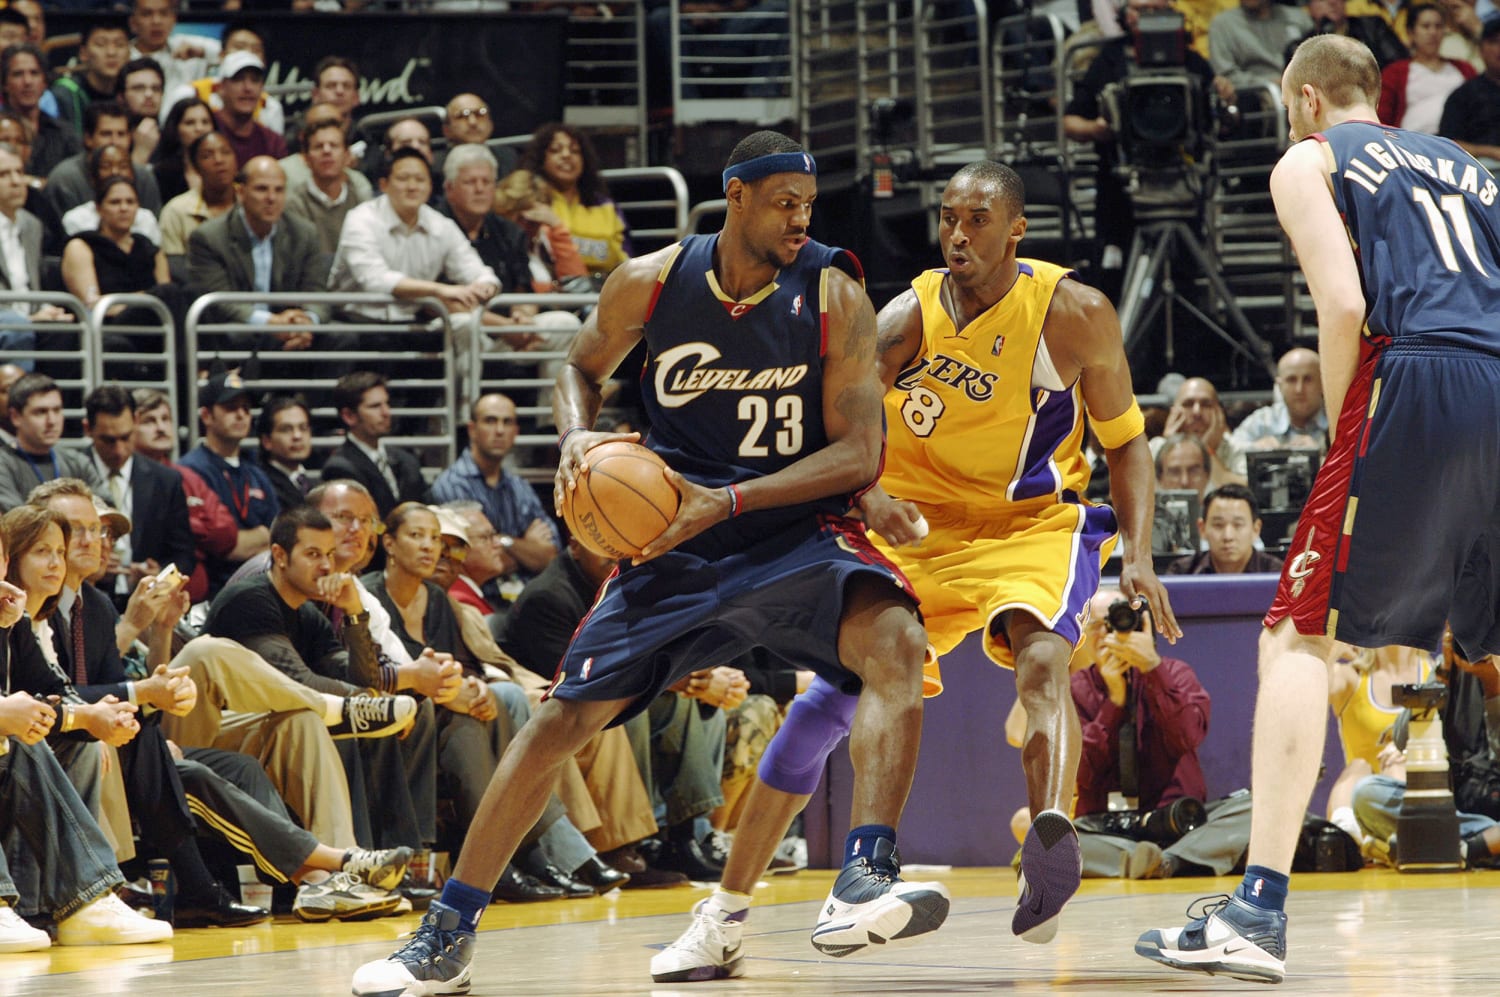 LeBron James and Kobe Bryant Had an Unspoken Battle During the